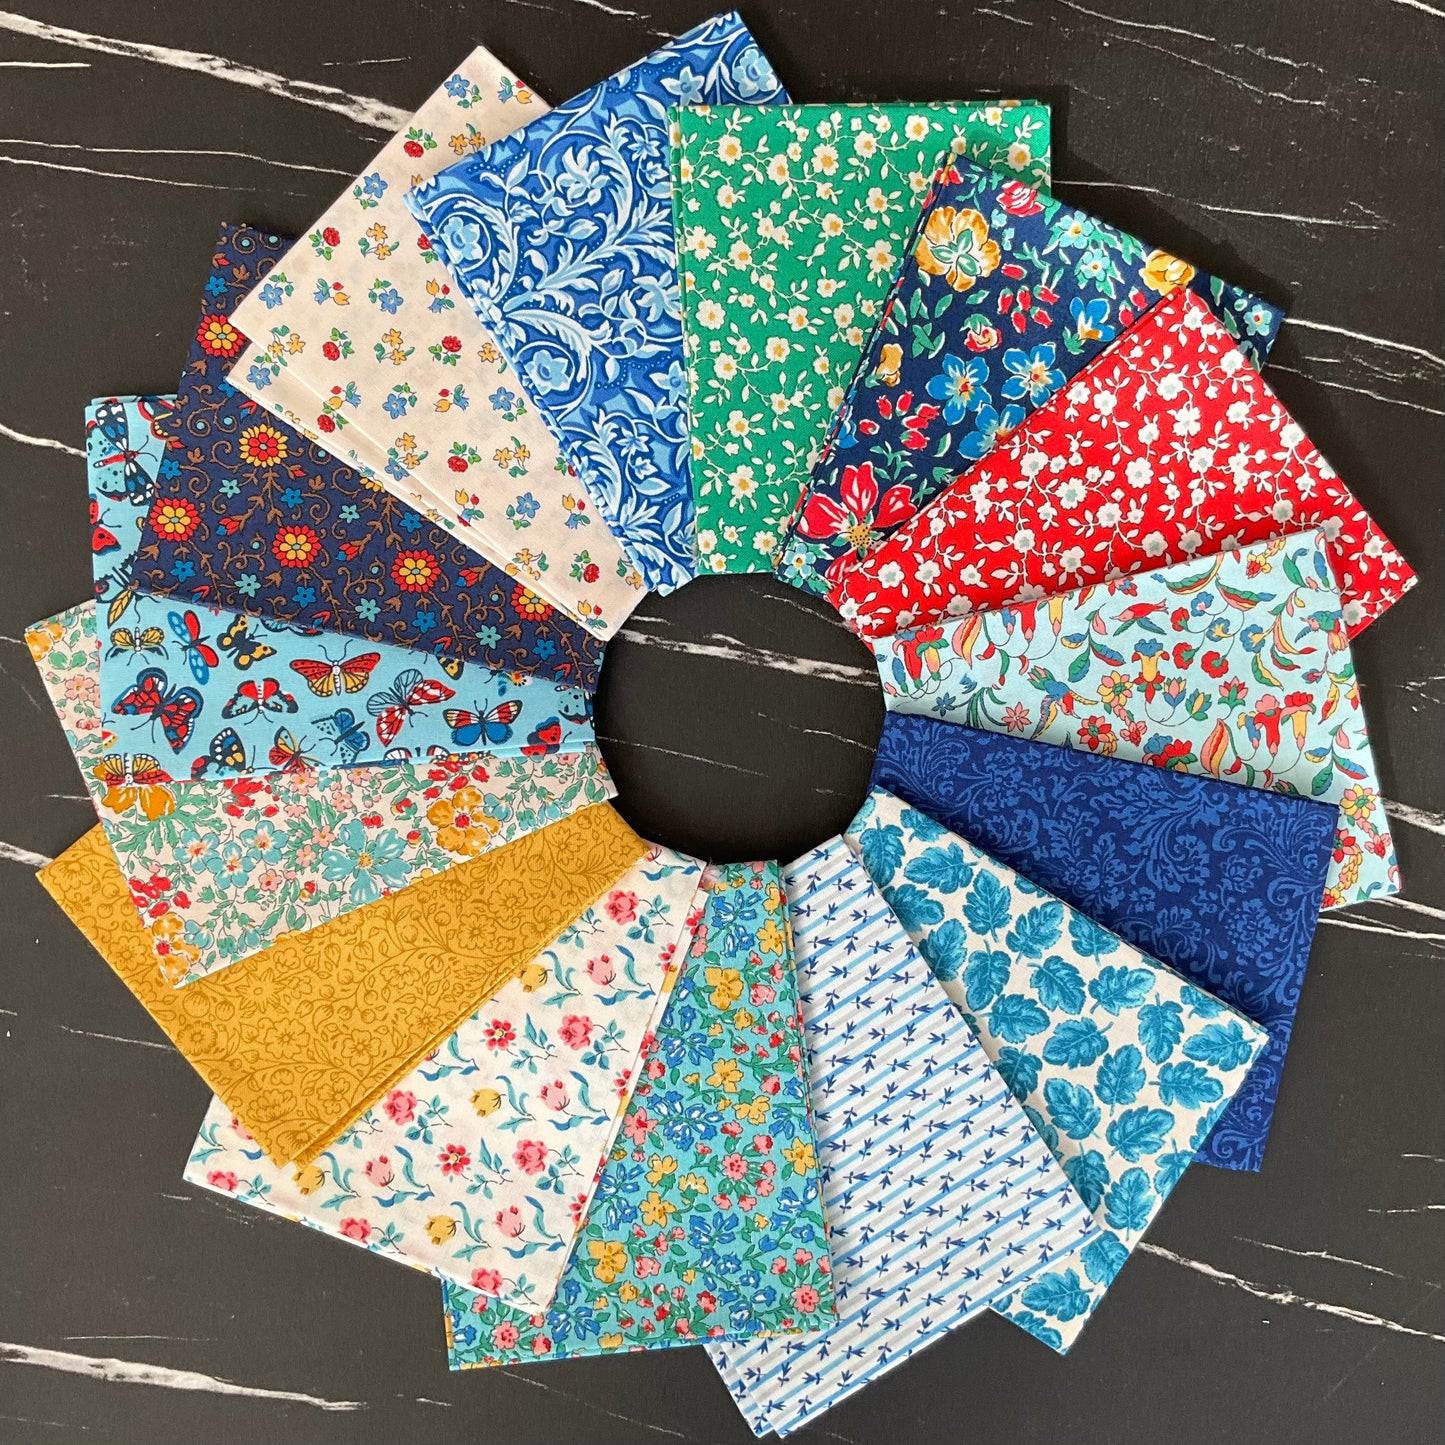 The Collector's Home Curiosity Brights Fat Quarter Bundle